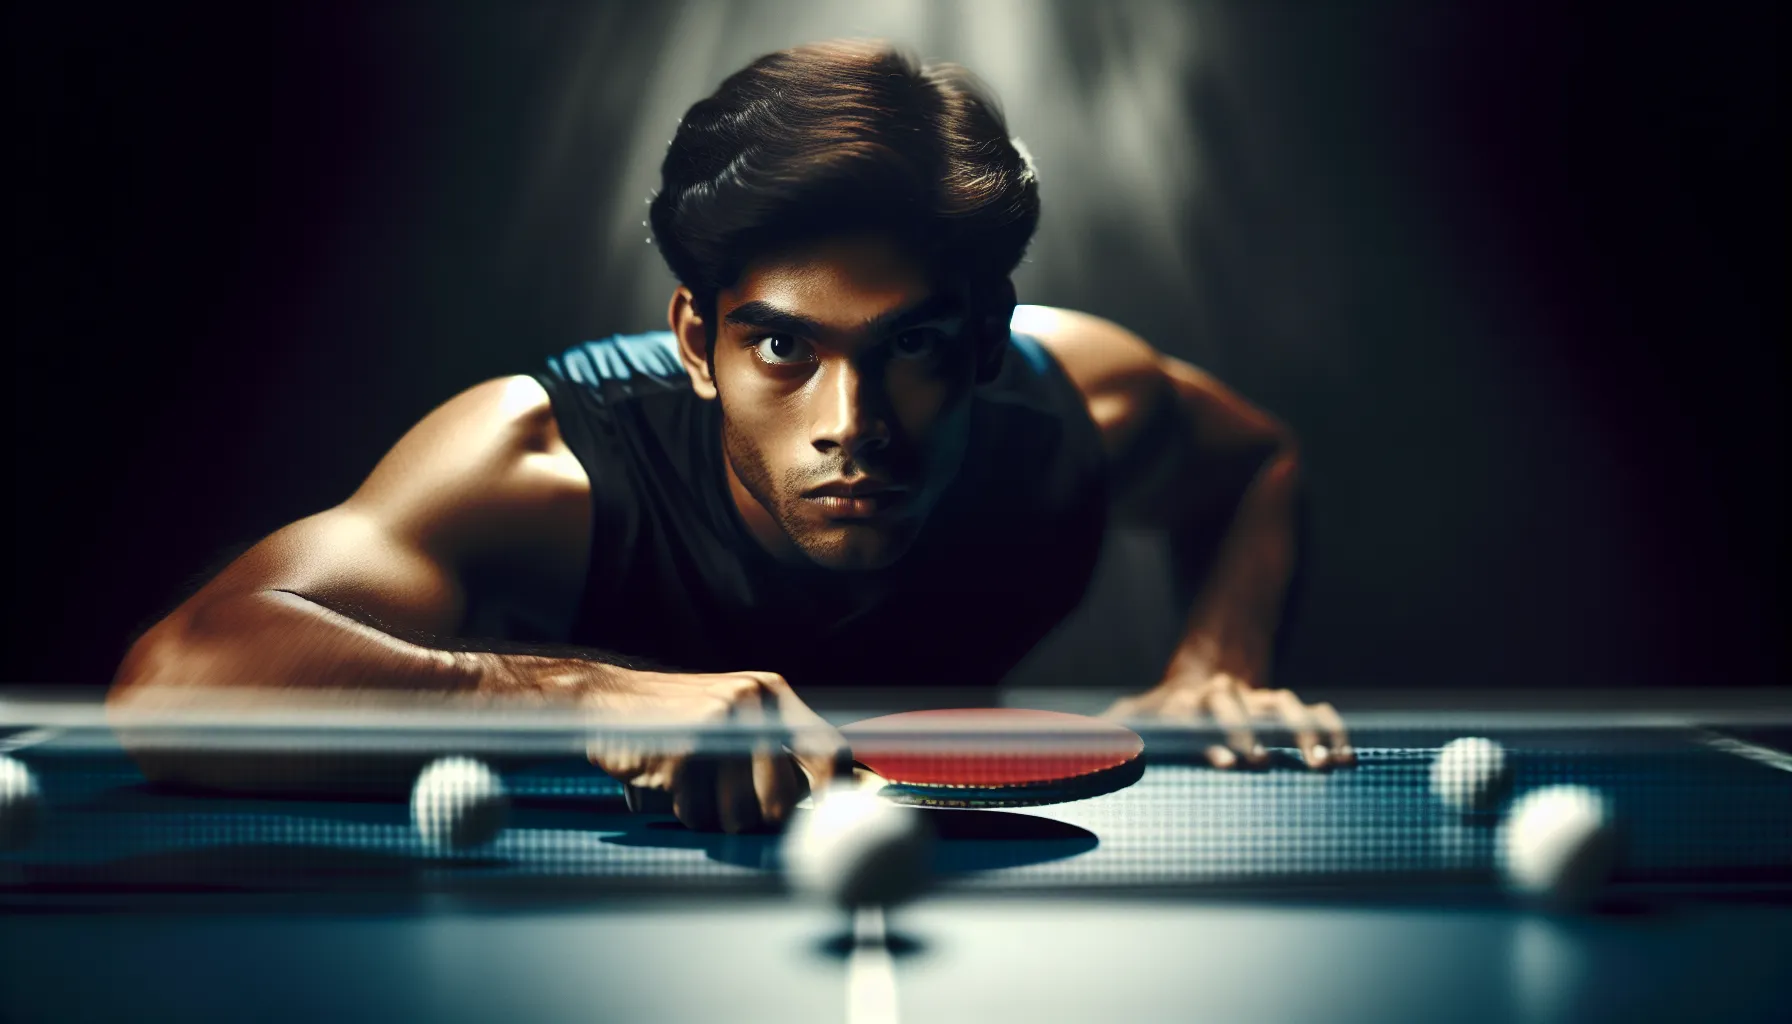 Table Tennis Concentration - The Mind Game